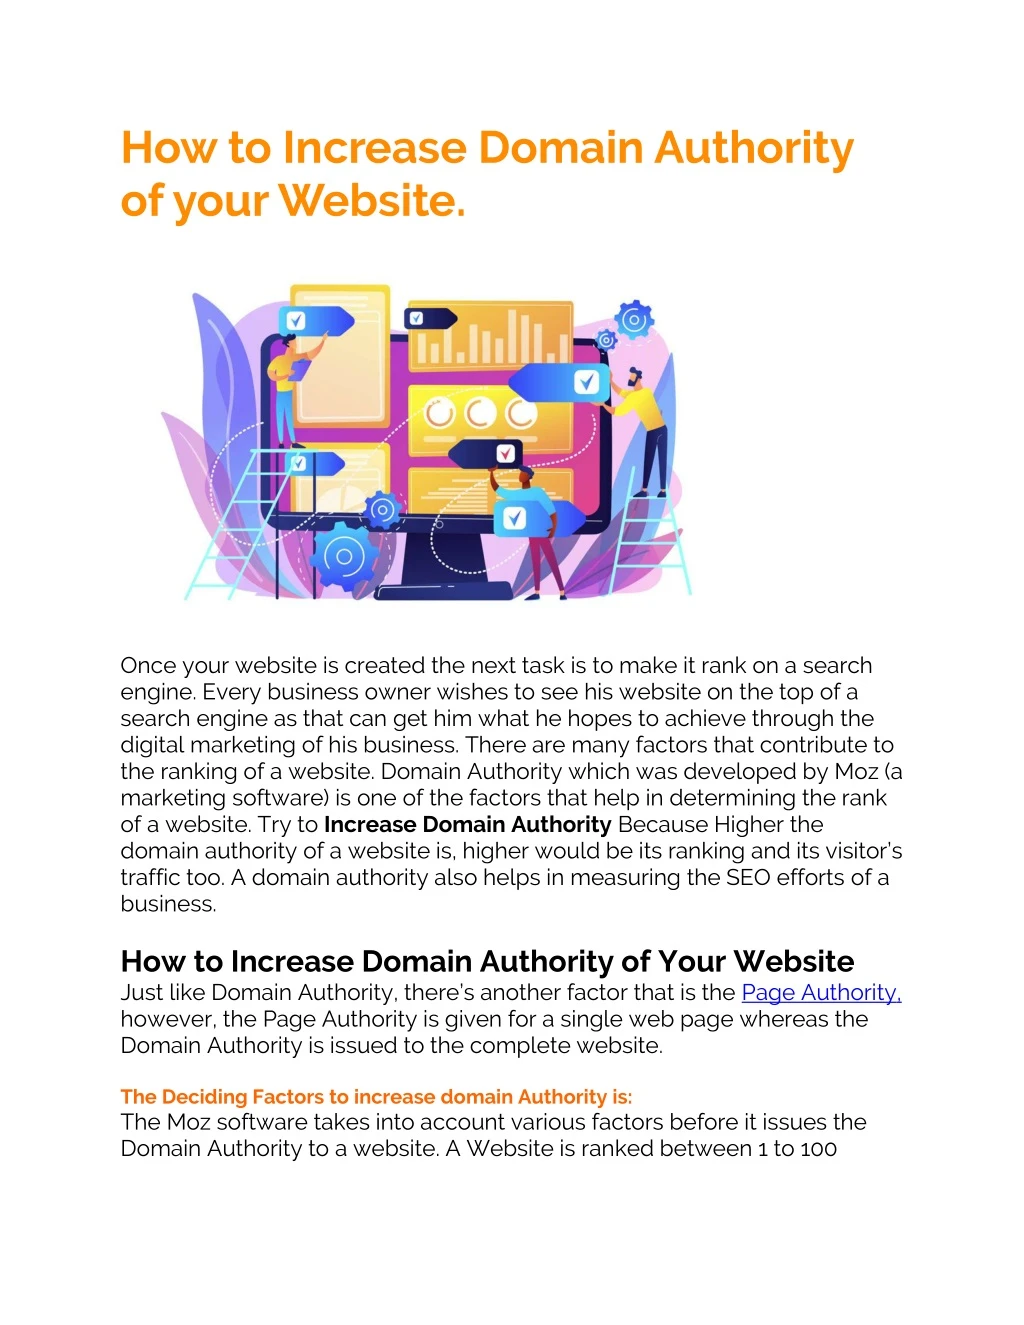 how to increase domain authority of your website